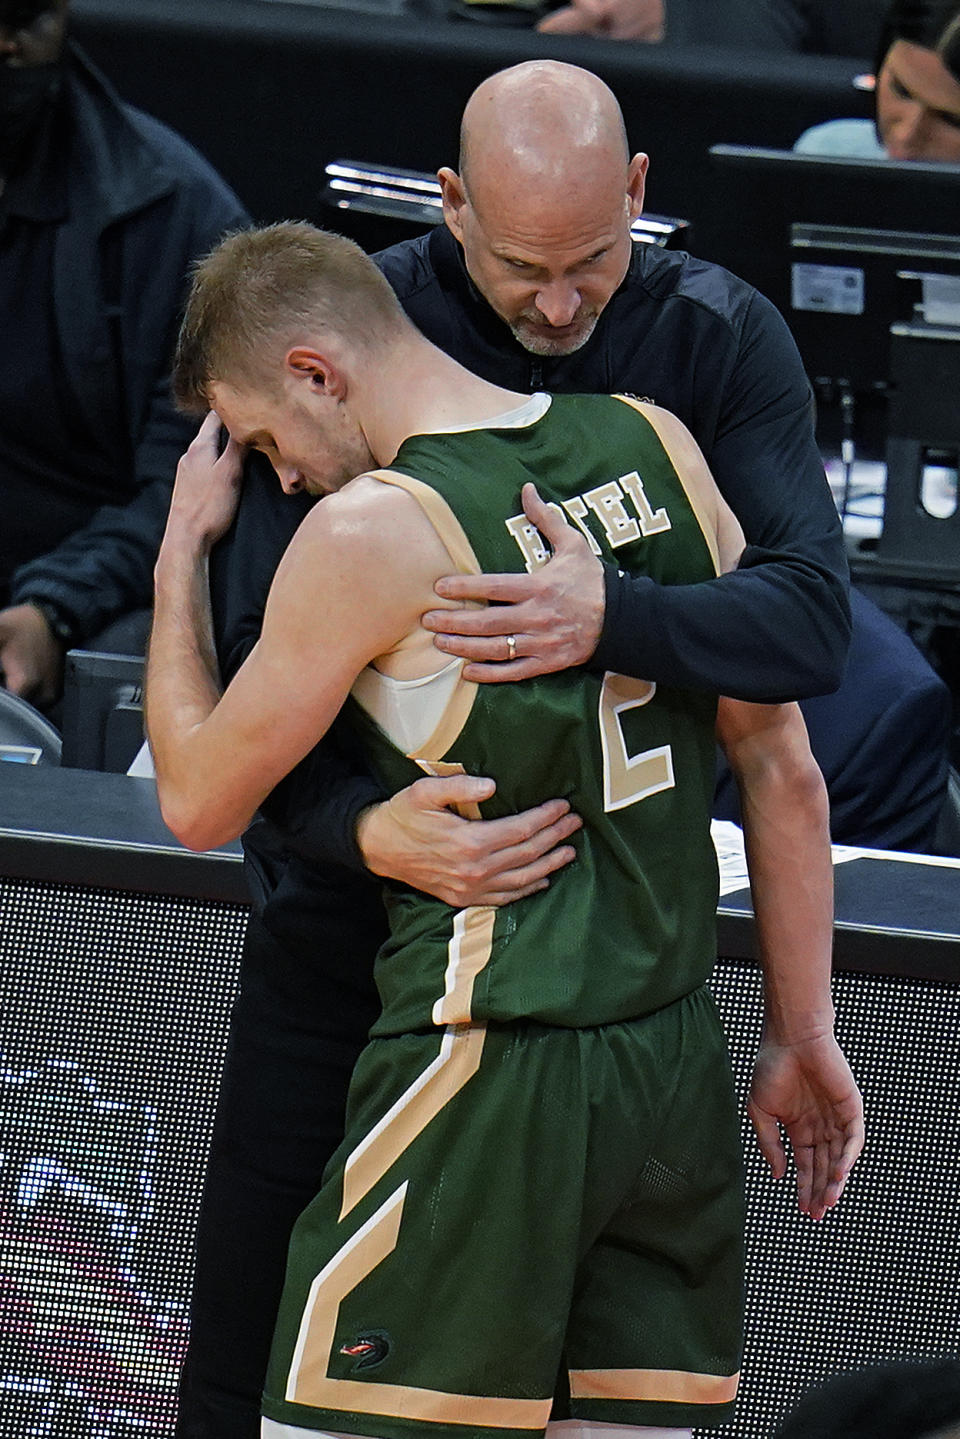 UAB coach Andy Kennedy hugs Michael Ertel (2), who was headed to the bench in the final minute of the team's college basketball game against Houston in the first round of the NCAA men's tournament in Pittsburgh, Friday, March 18, 2022. Houston won 82-68. (AP Photo/Gene J. Puskar)